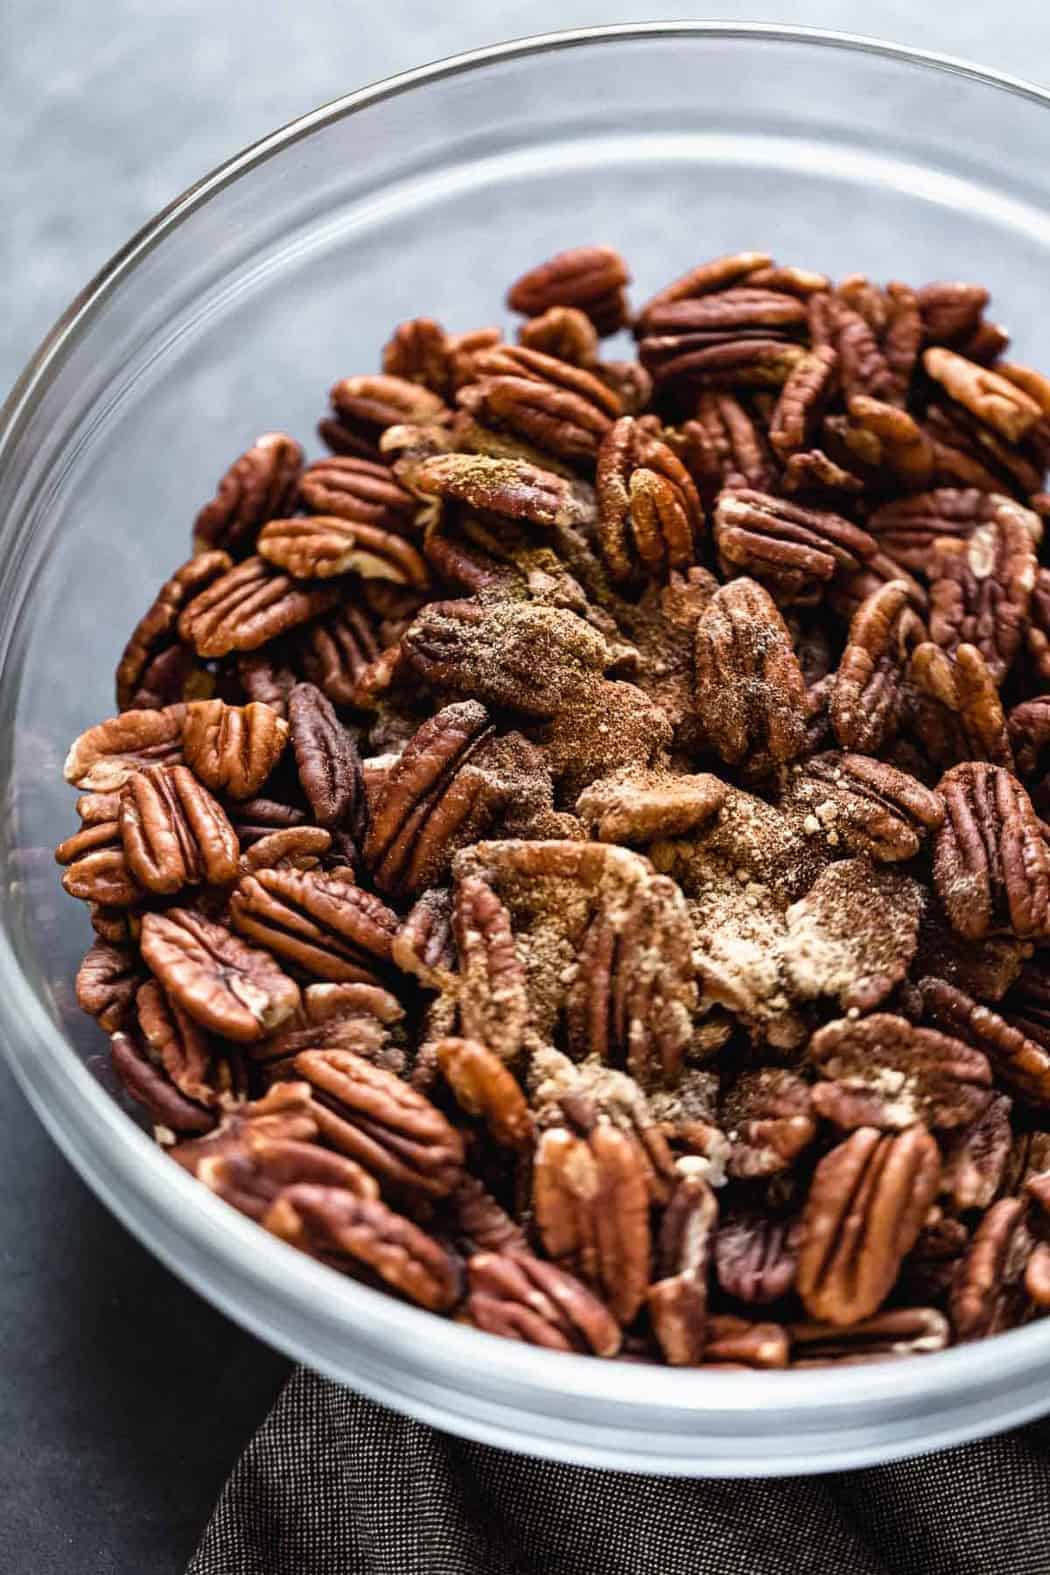 Pecans in a clear glass bowl with maple syrup and cinnamon on top